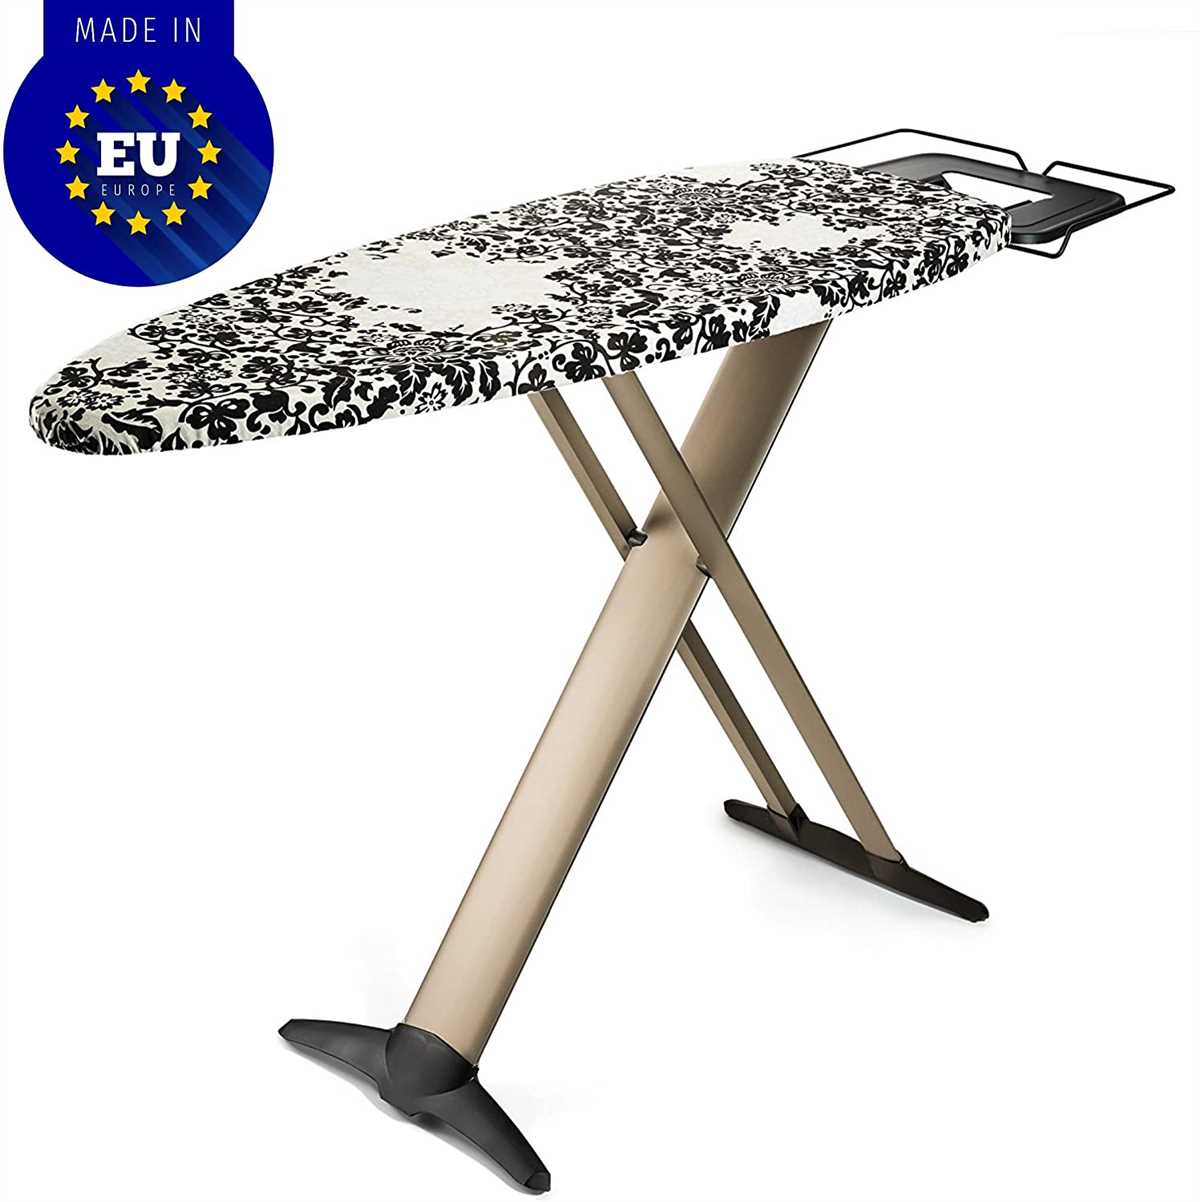 1. Traditional Ironing Board